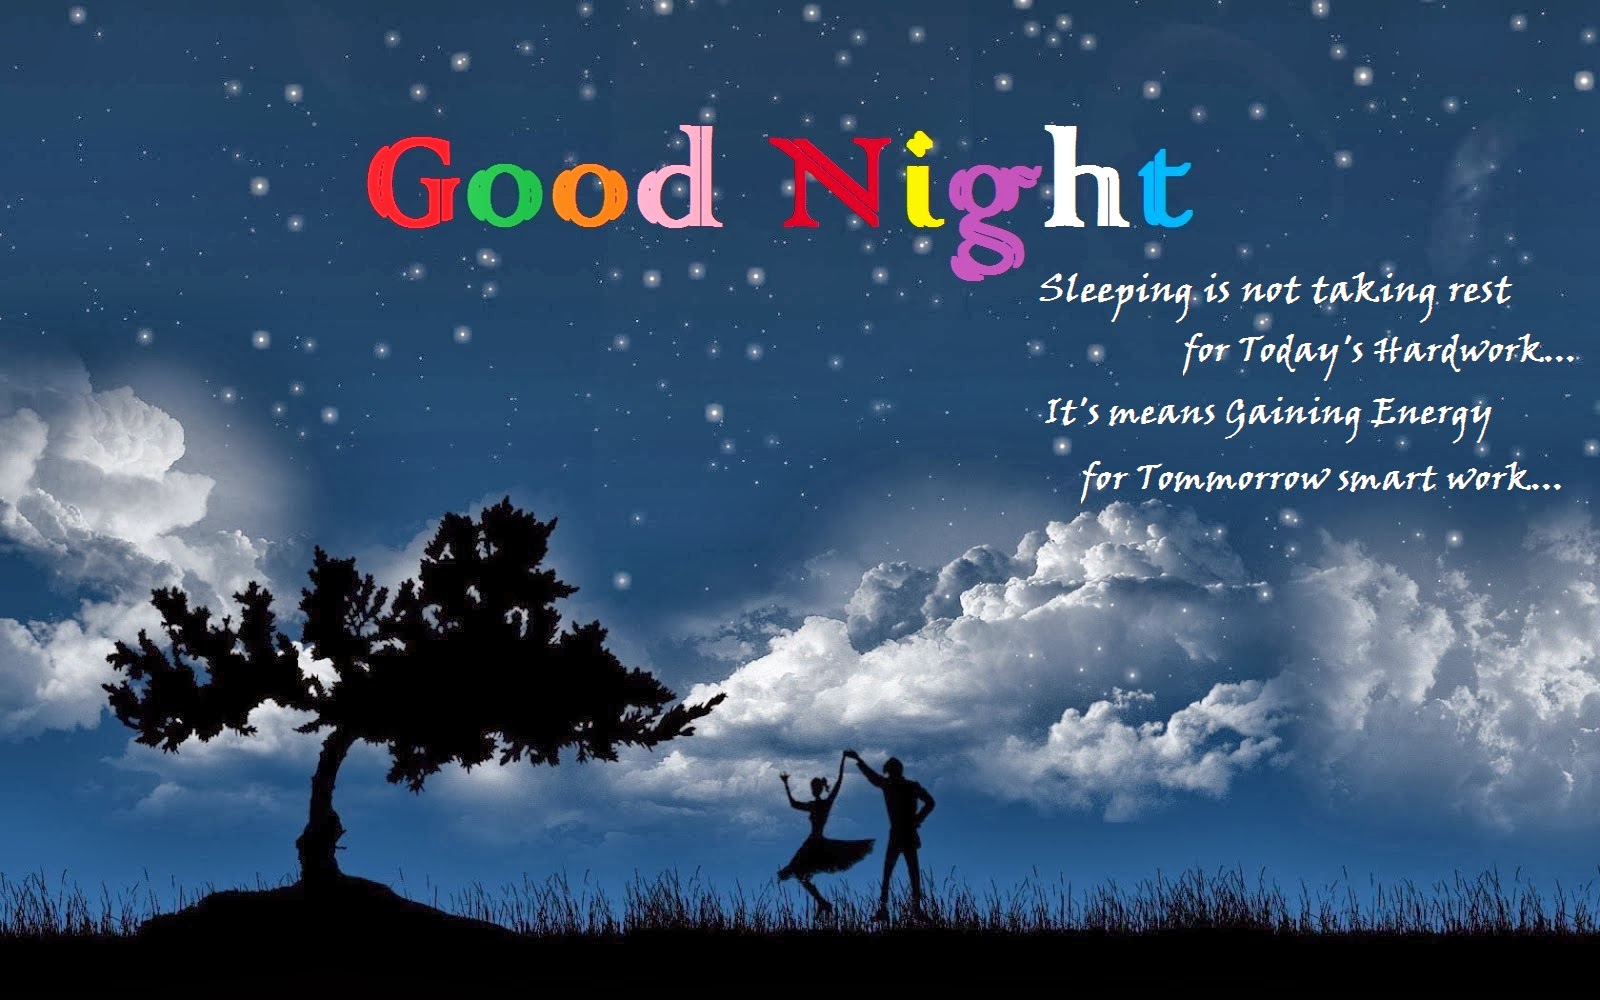 good night wishes wallpaper,sky,people in nature,natural landscape,text,morning